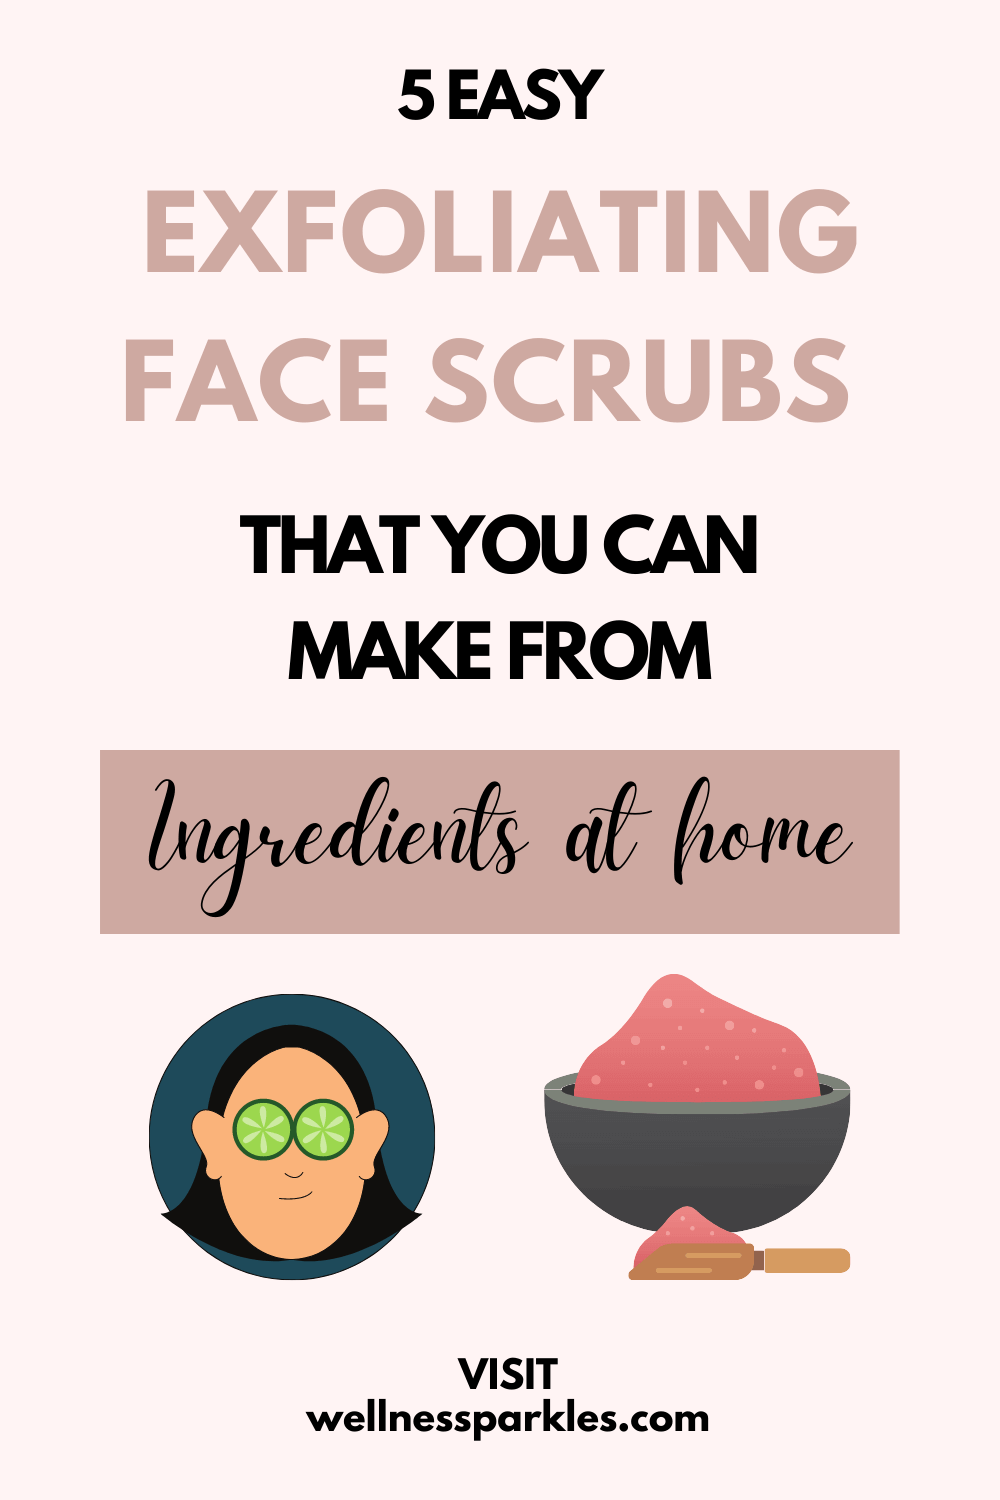 5 easy Face scrubs that you can make from ingredients at home